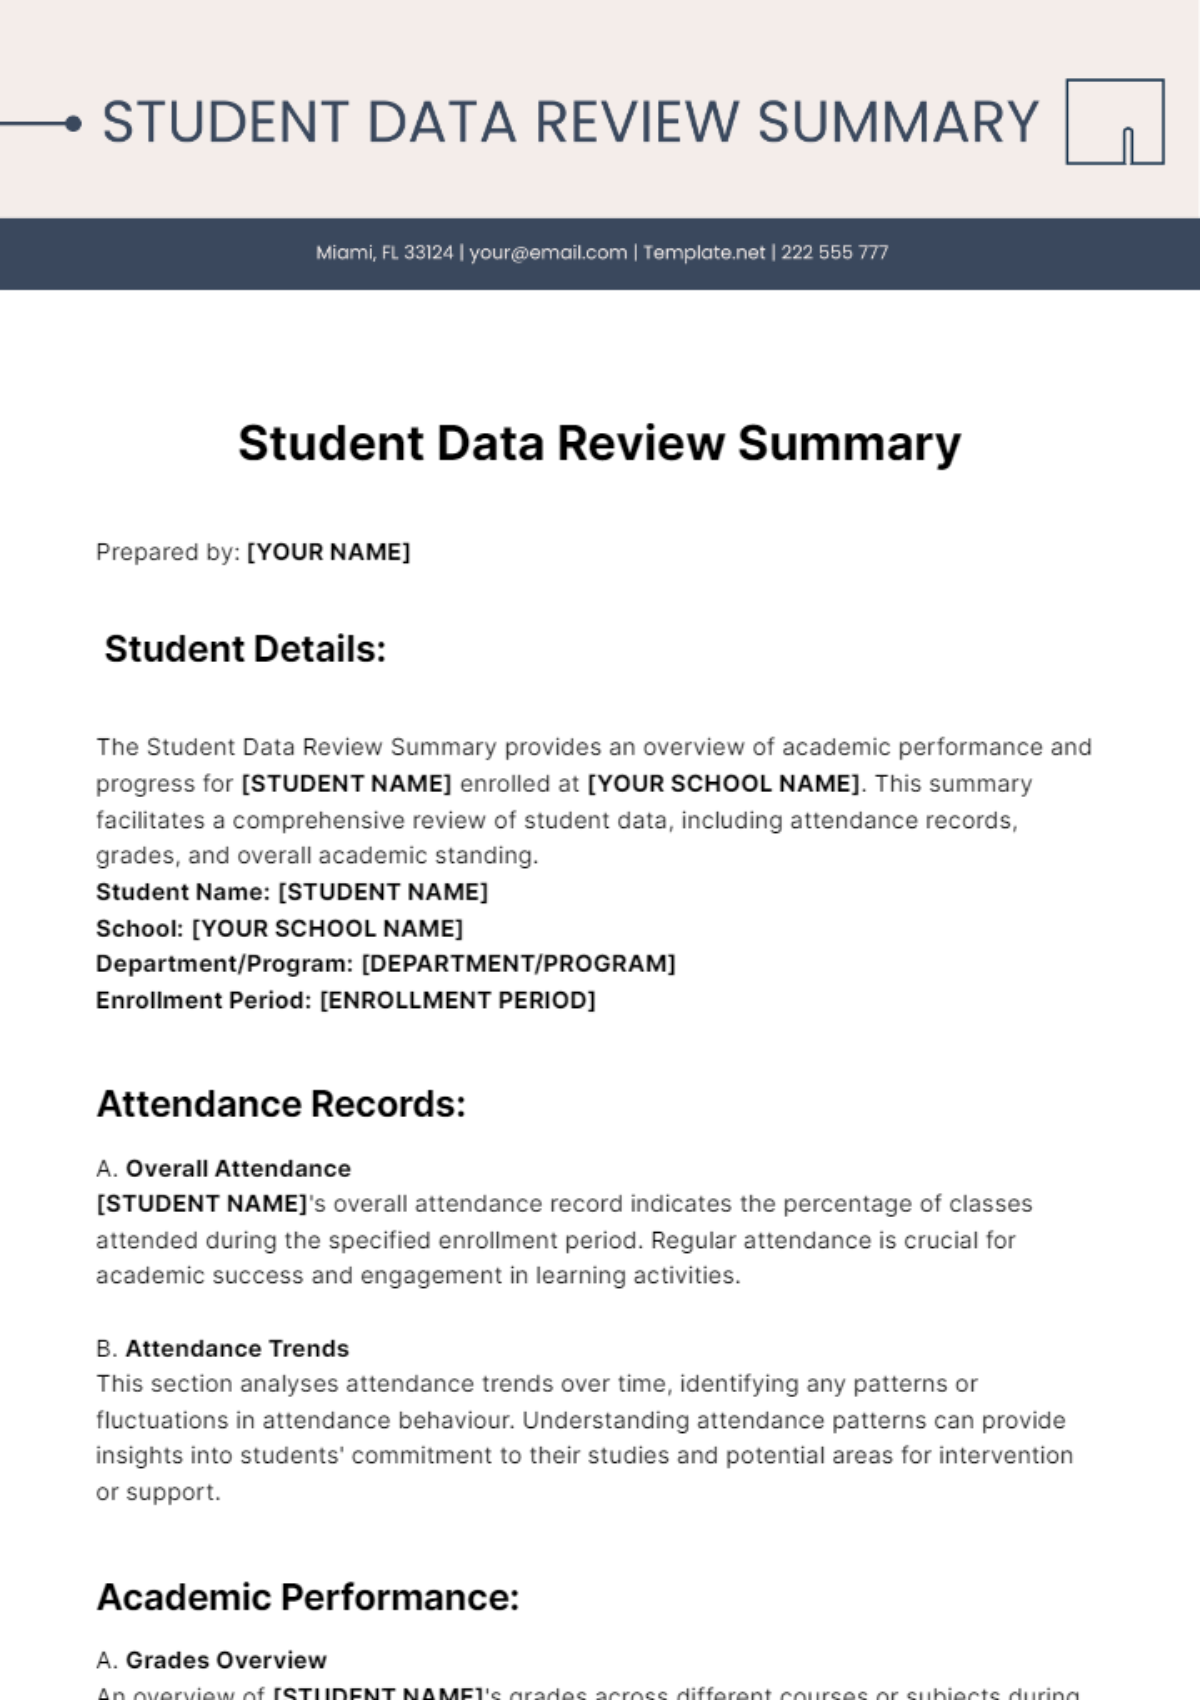 Student Data Review Summary